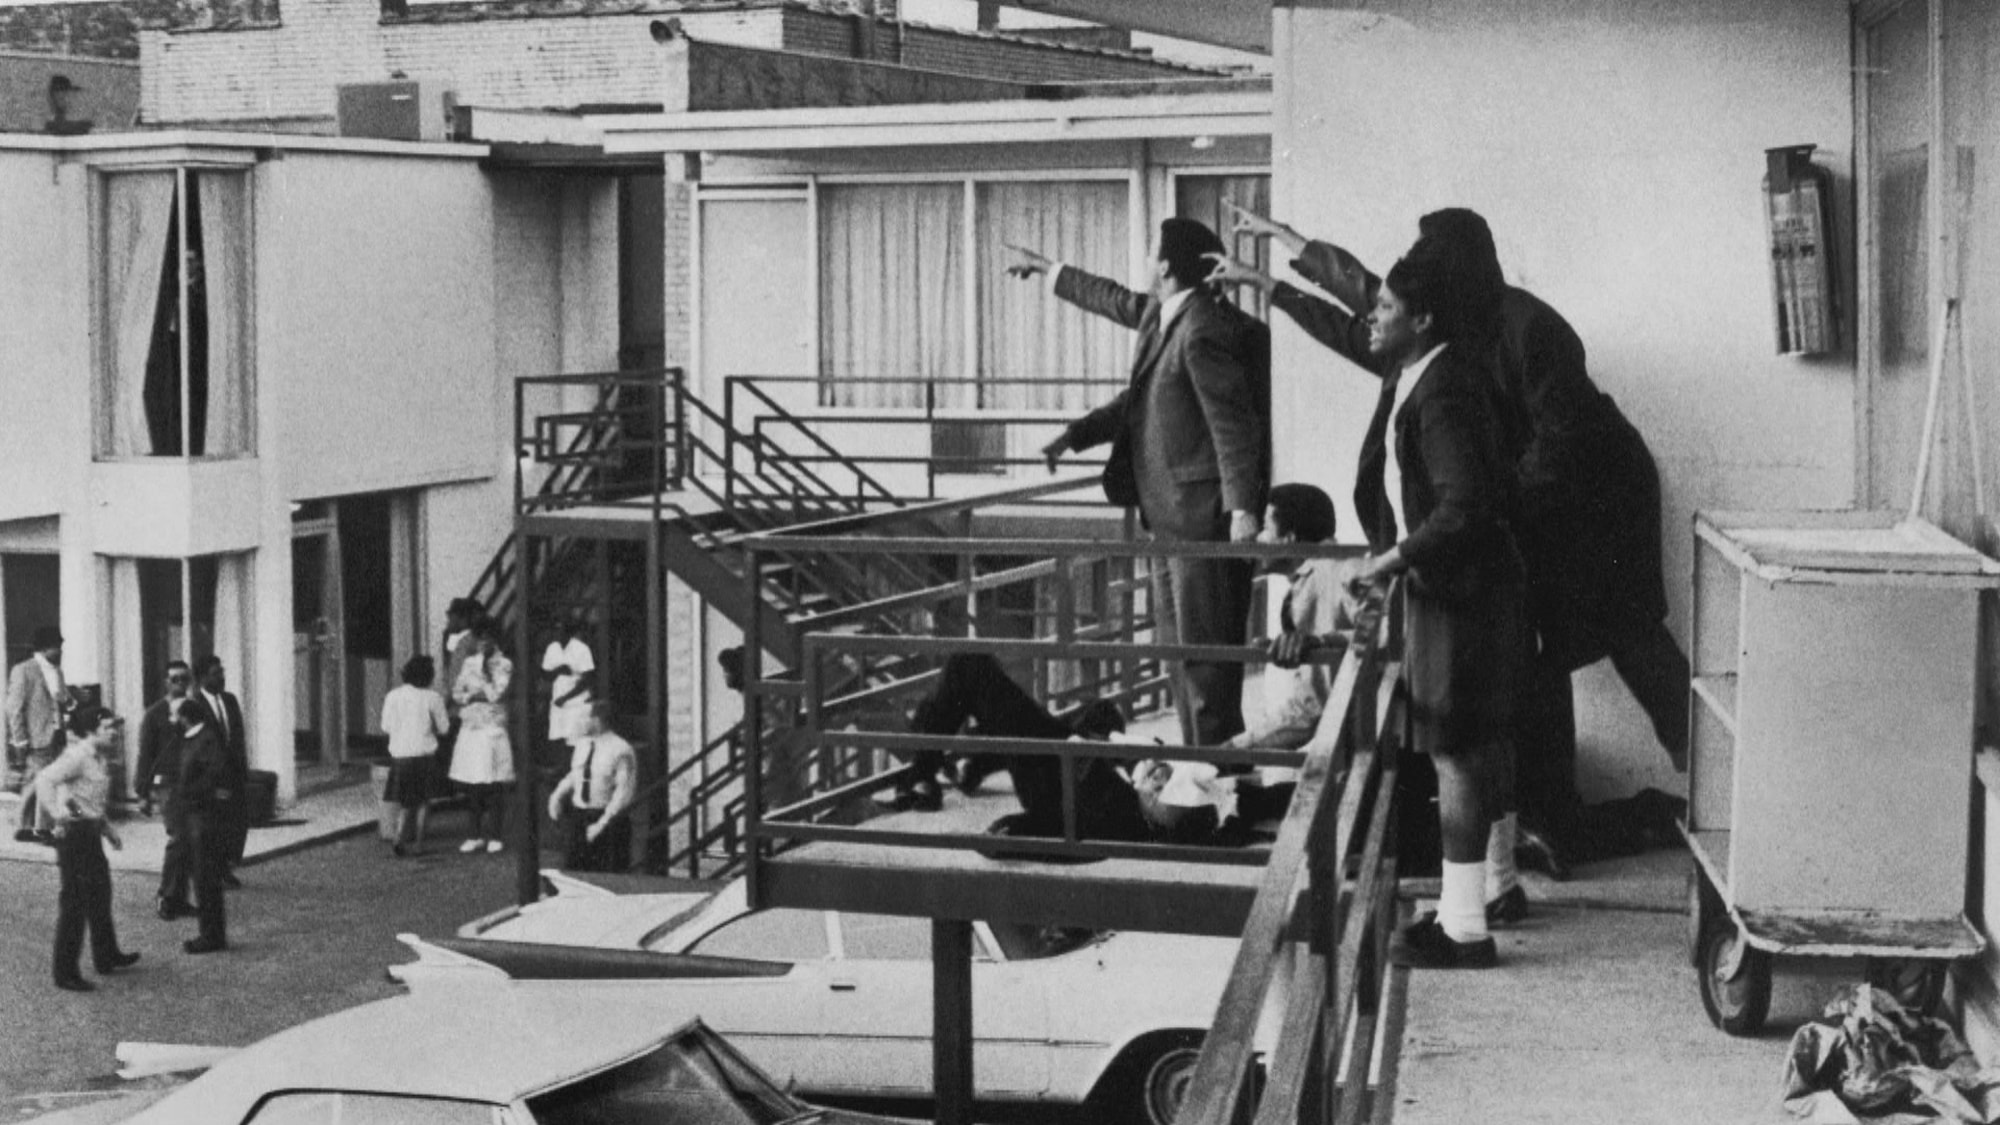 Associates of Martin Luther King Jr. point toward the sound where the gunfire originated just moments after his assassination at the Lorraine Motel on April 4, 1968, in Memphis, Tenn.Joseph Louw / The LIFE Images Collection via Getty